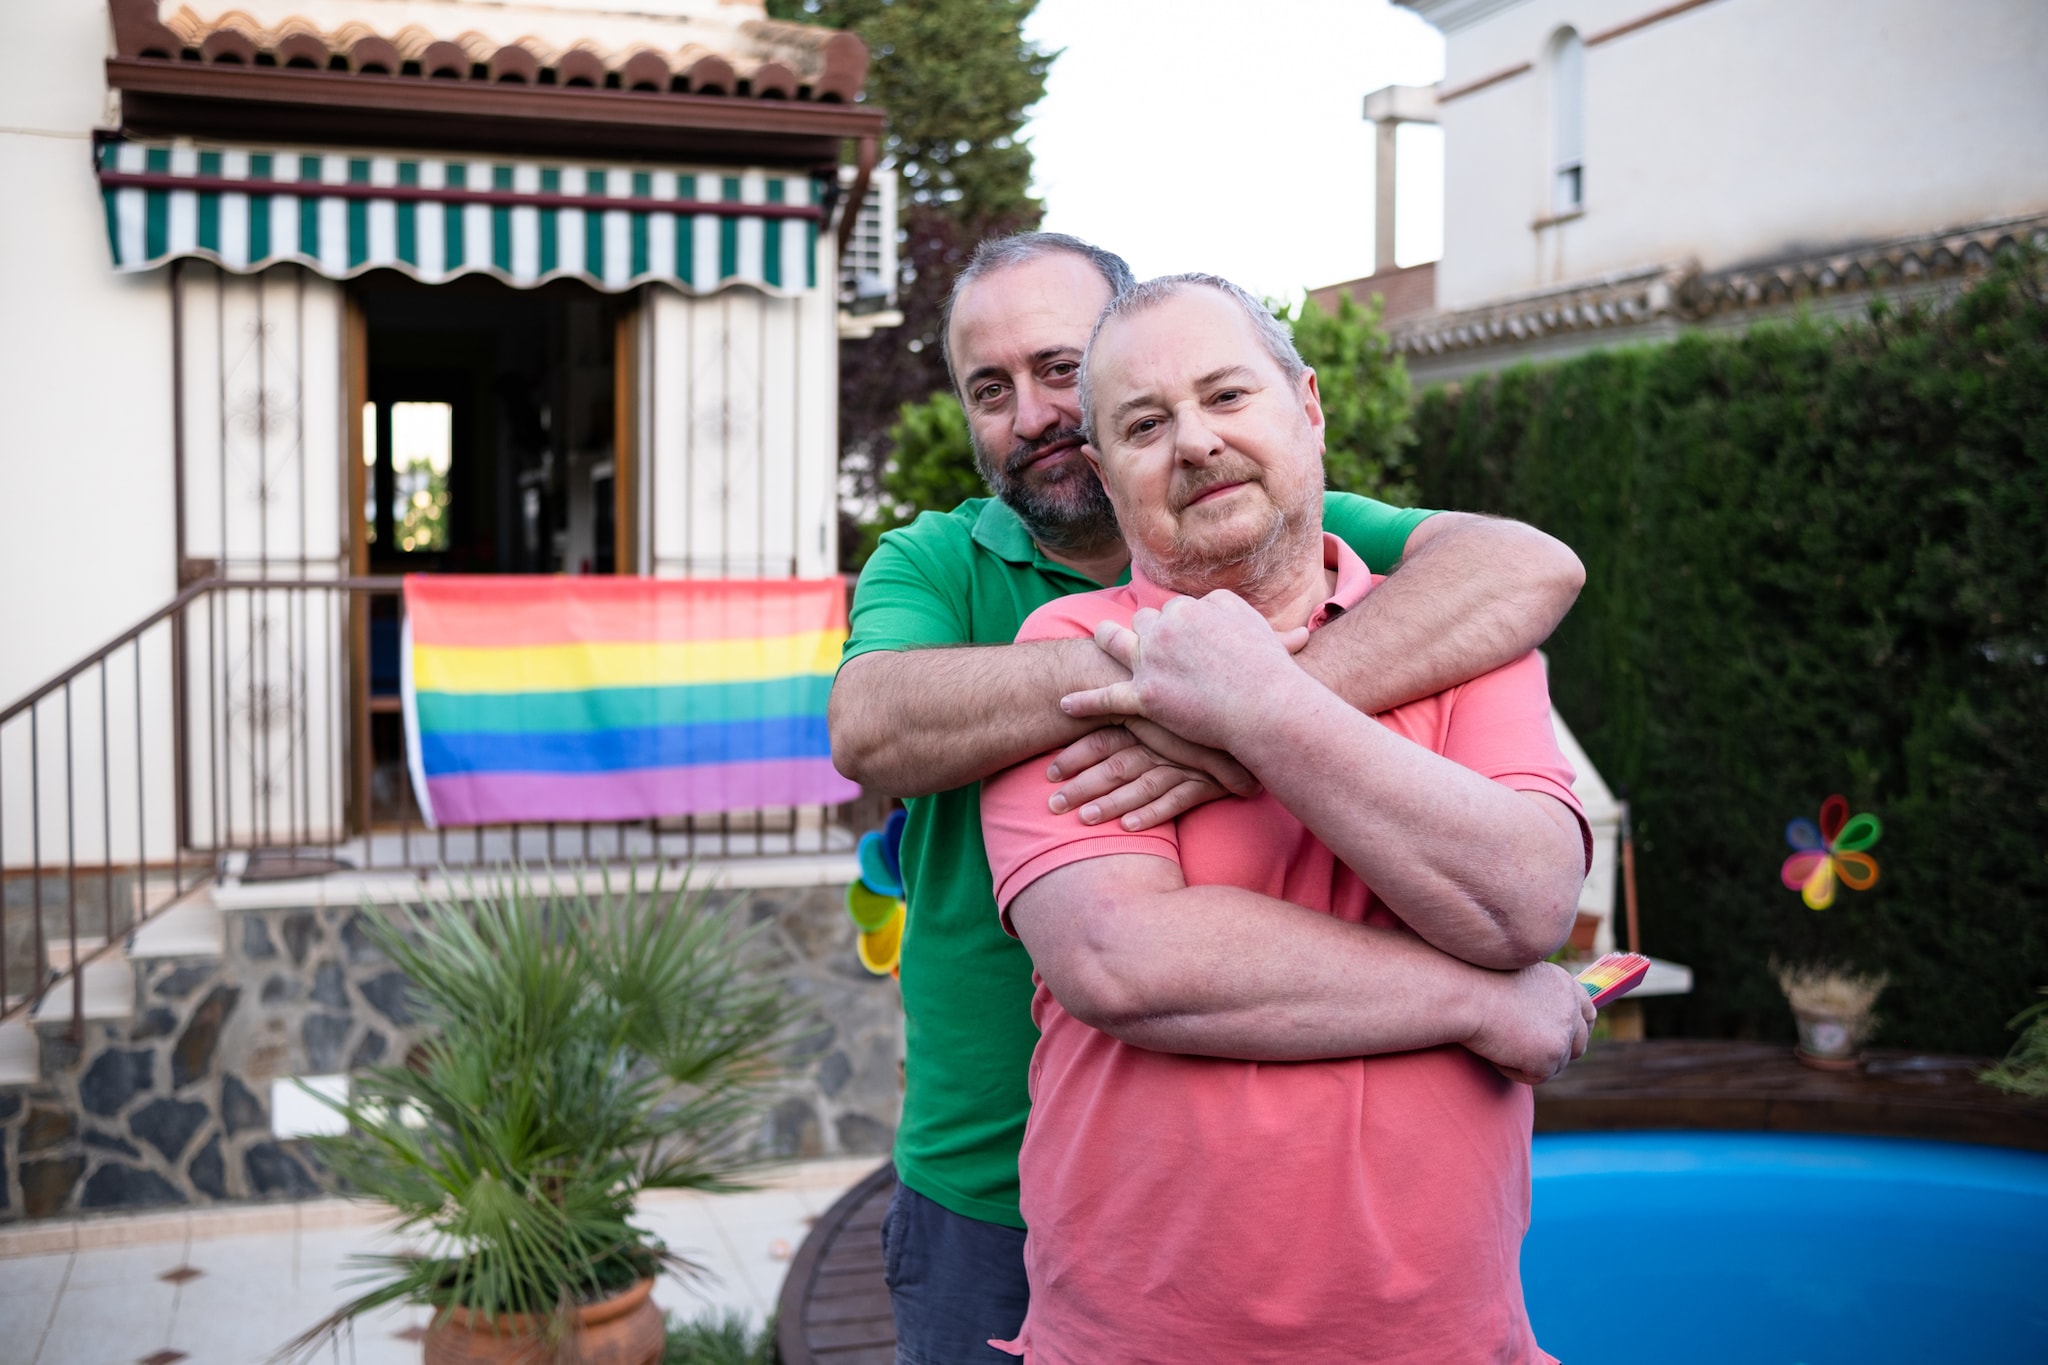 LGBTQ couple embracing in their back yard with a LGBTQ flag in the background.